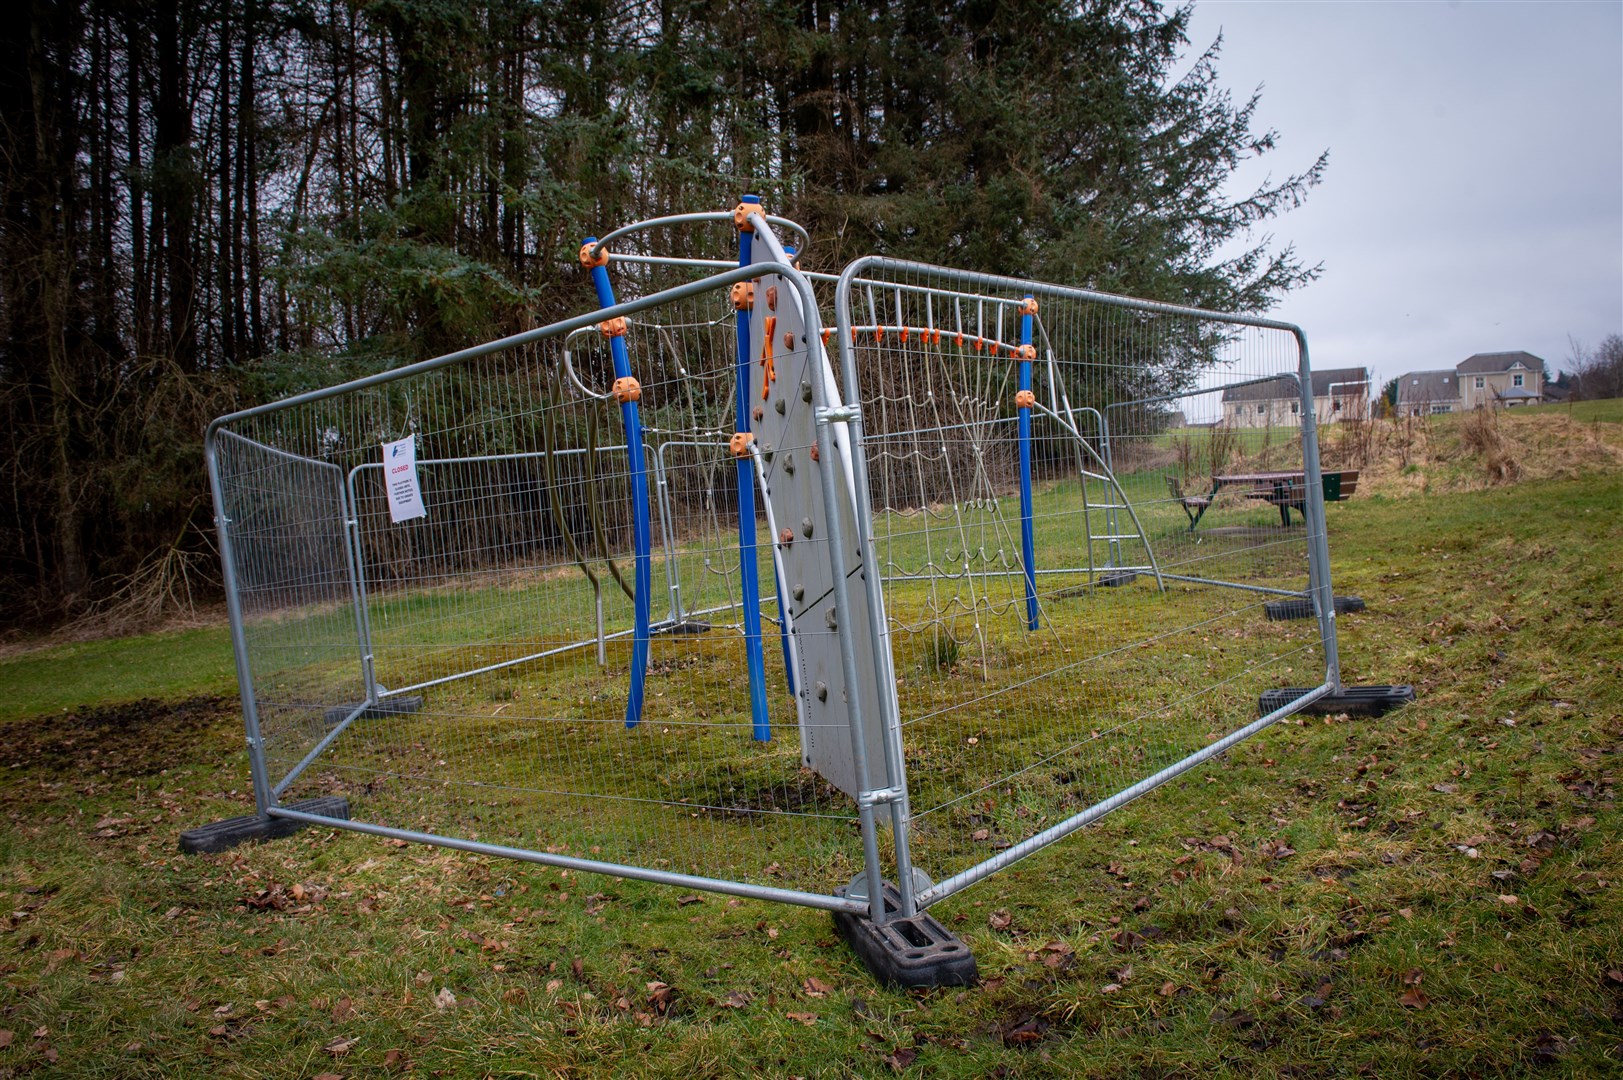 A total of 40 play parks across the Highlands have been closed or had equipment removed.